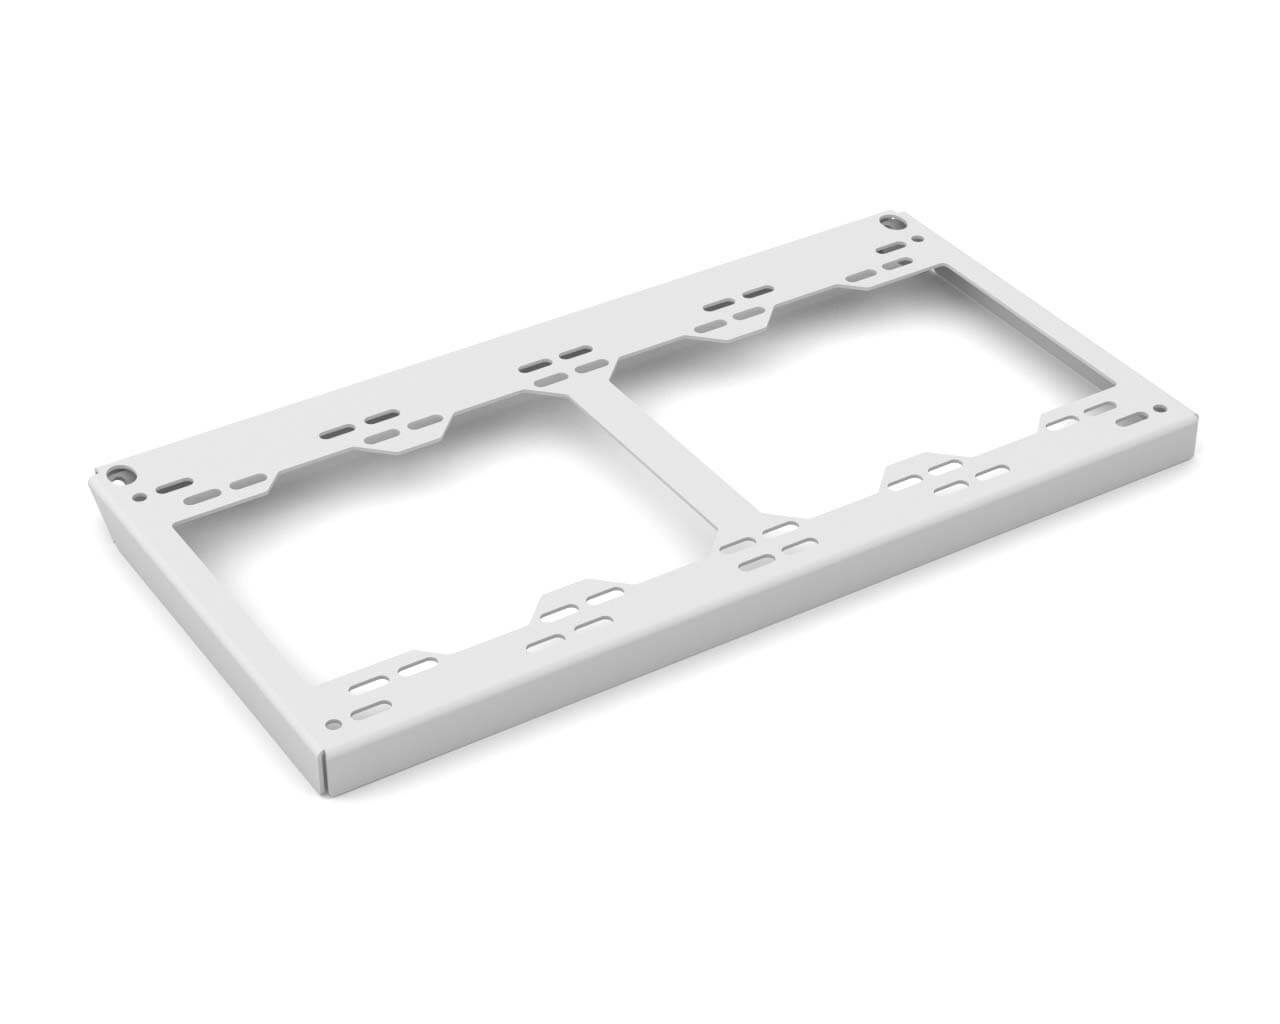 Praxis WetBenchSX AiO Add-On Bracket - PrimoChill - KEEPING IT COOL White